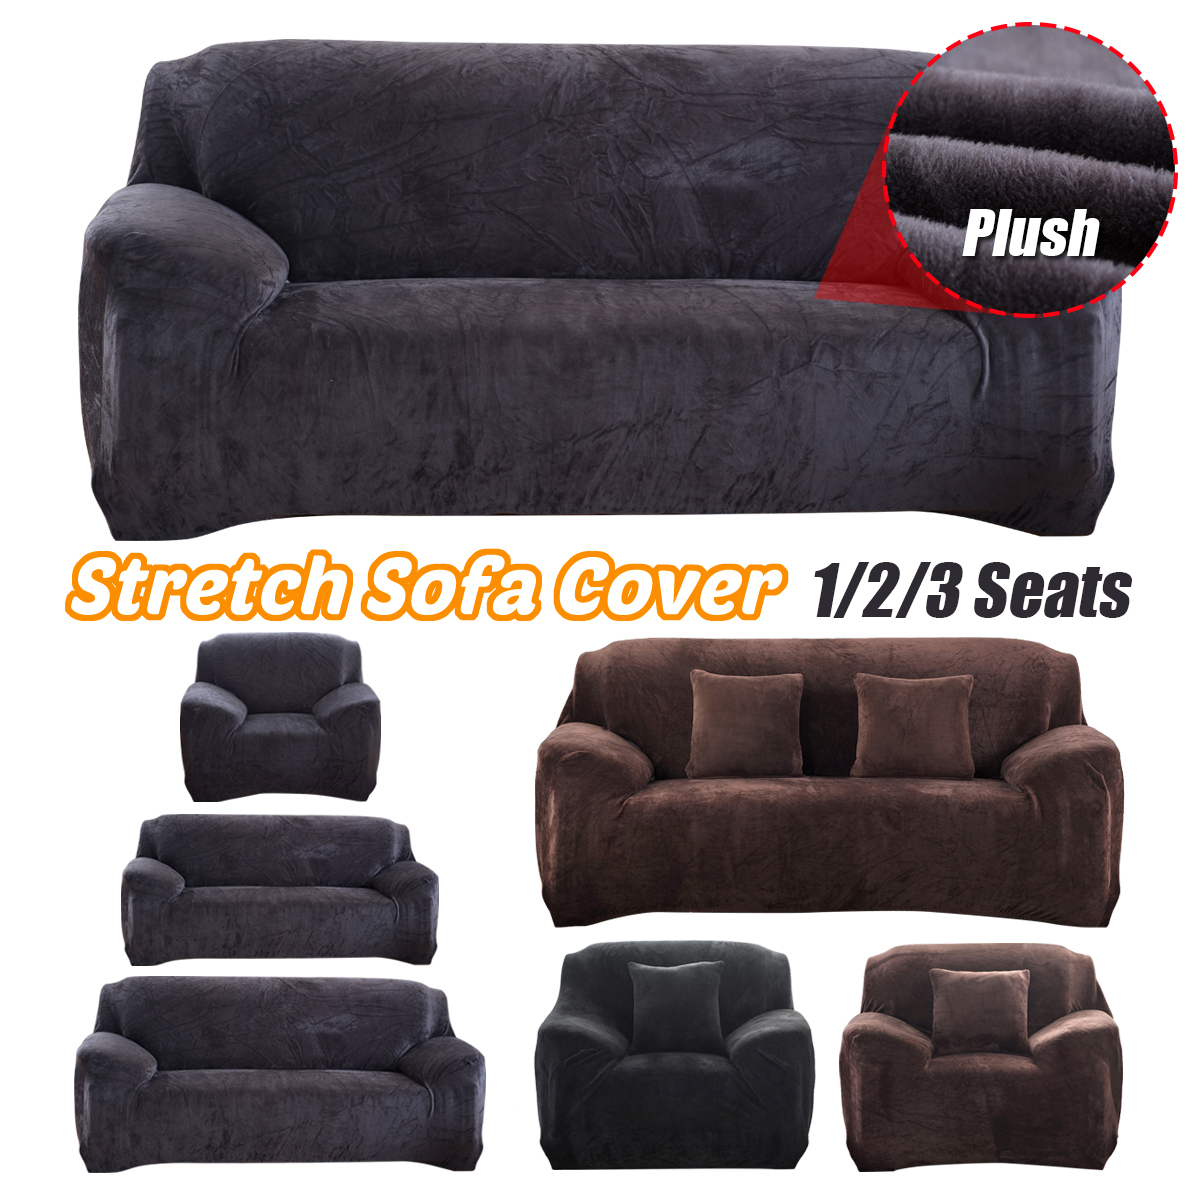 MEIGAR-123-Seats-Elastic-Stretch-Sofa-Armchair-Cover-Universal-Couch-Slipcover-Plush-Warm-For-Autumn-1748751-1